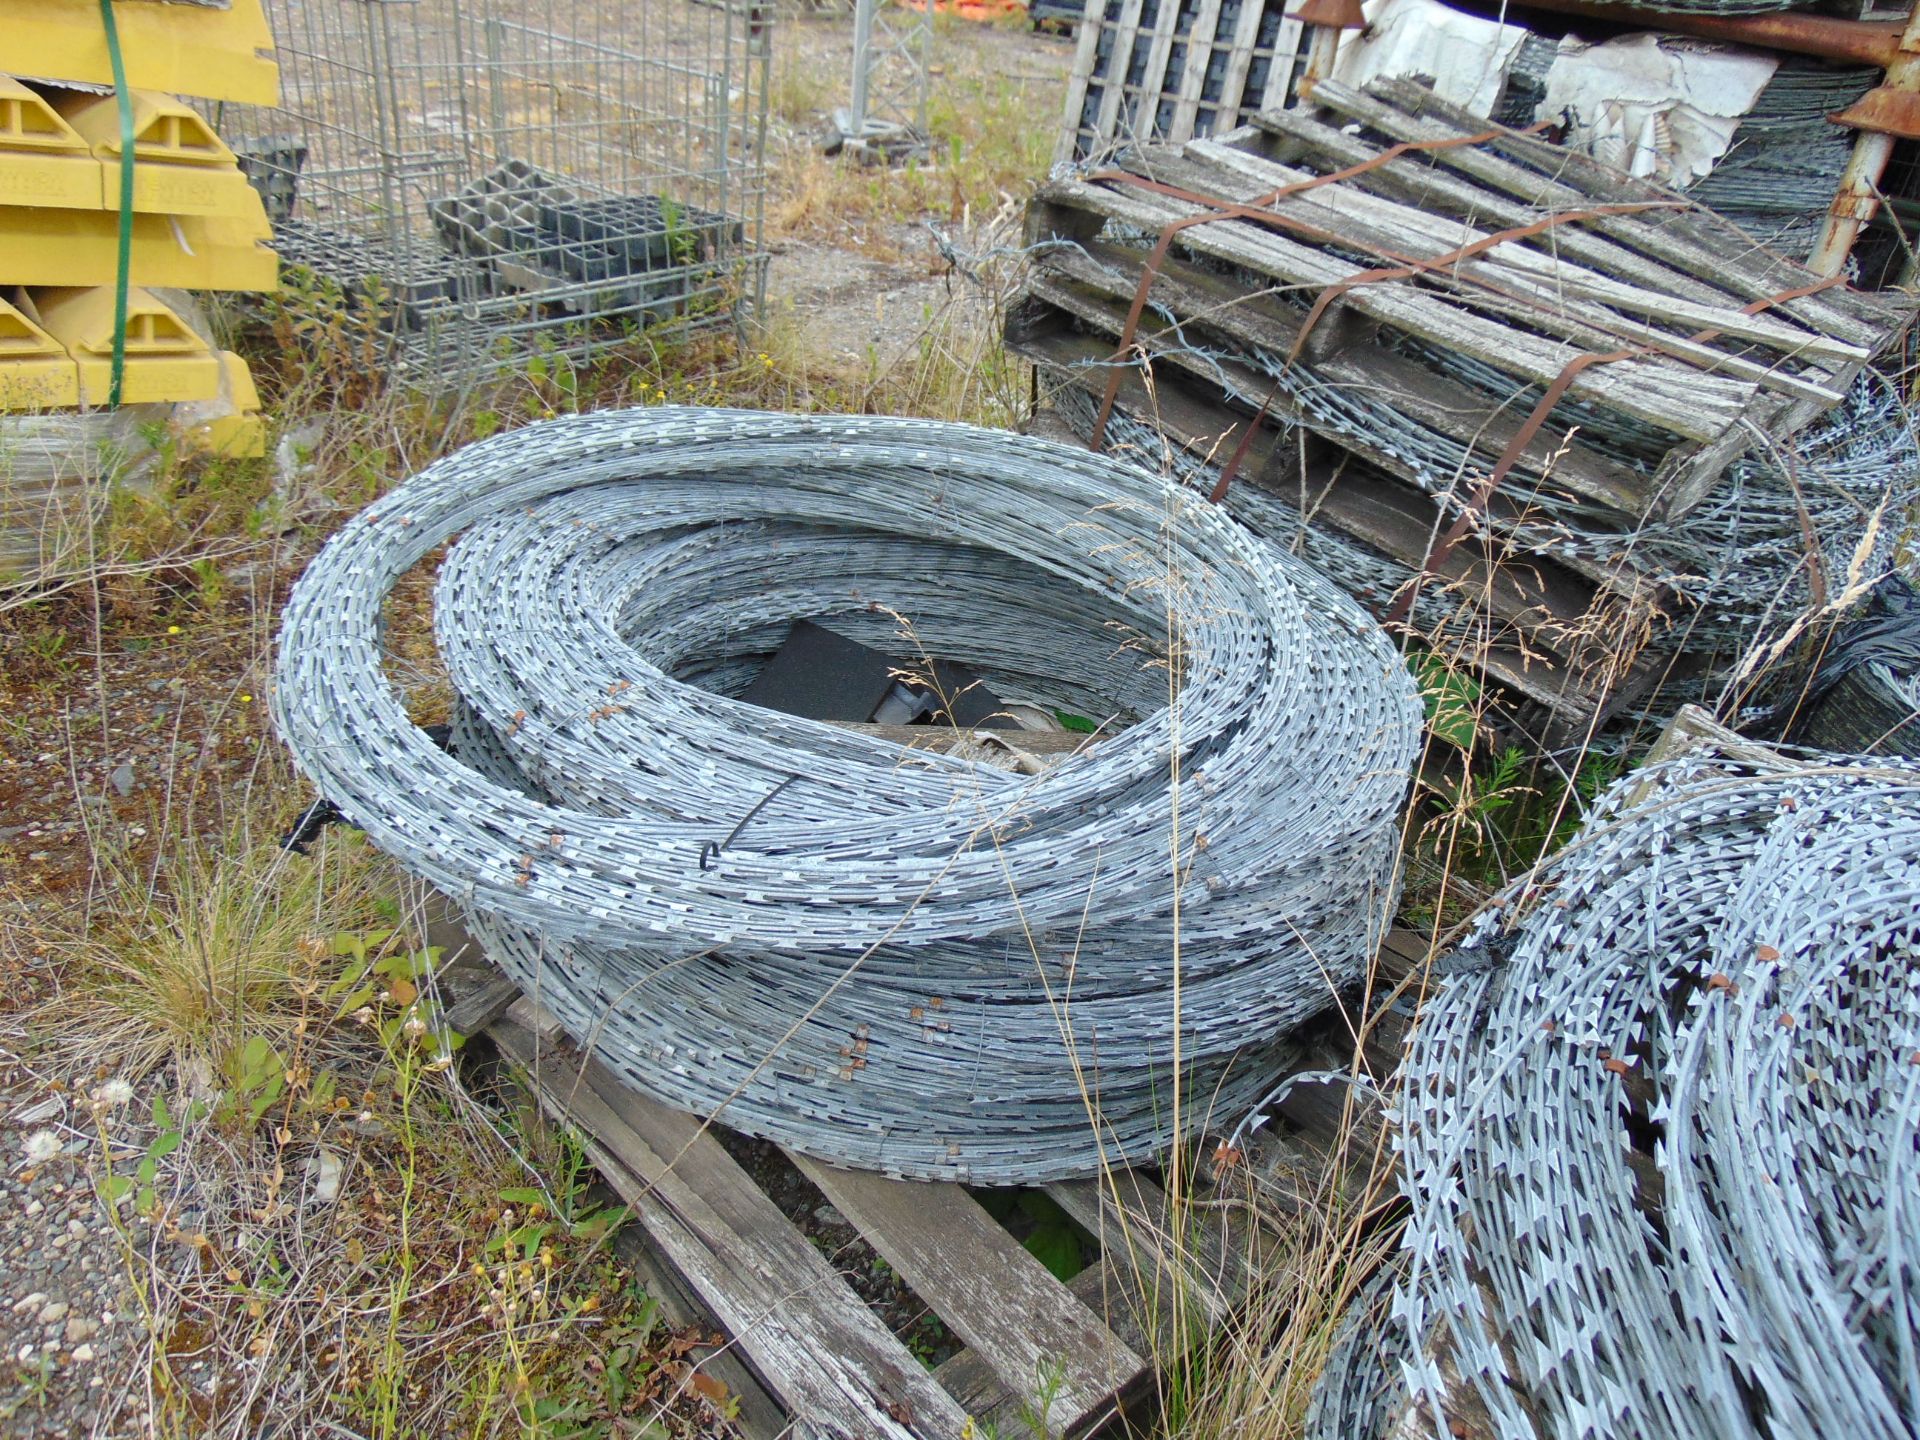 4 x Large Pallets of MoD Galvanised Razer Wire in Expanding Coils Quantity as shown - Image 4 of 6